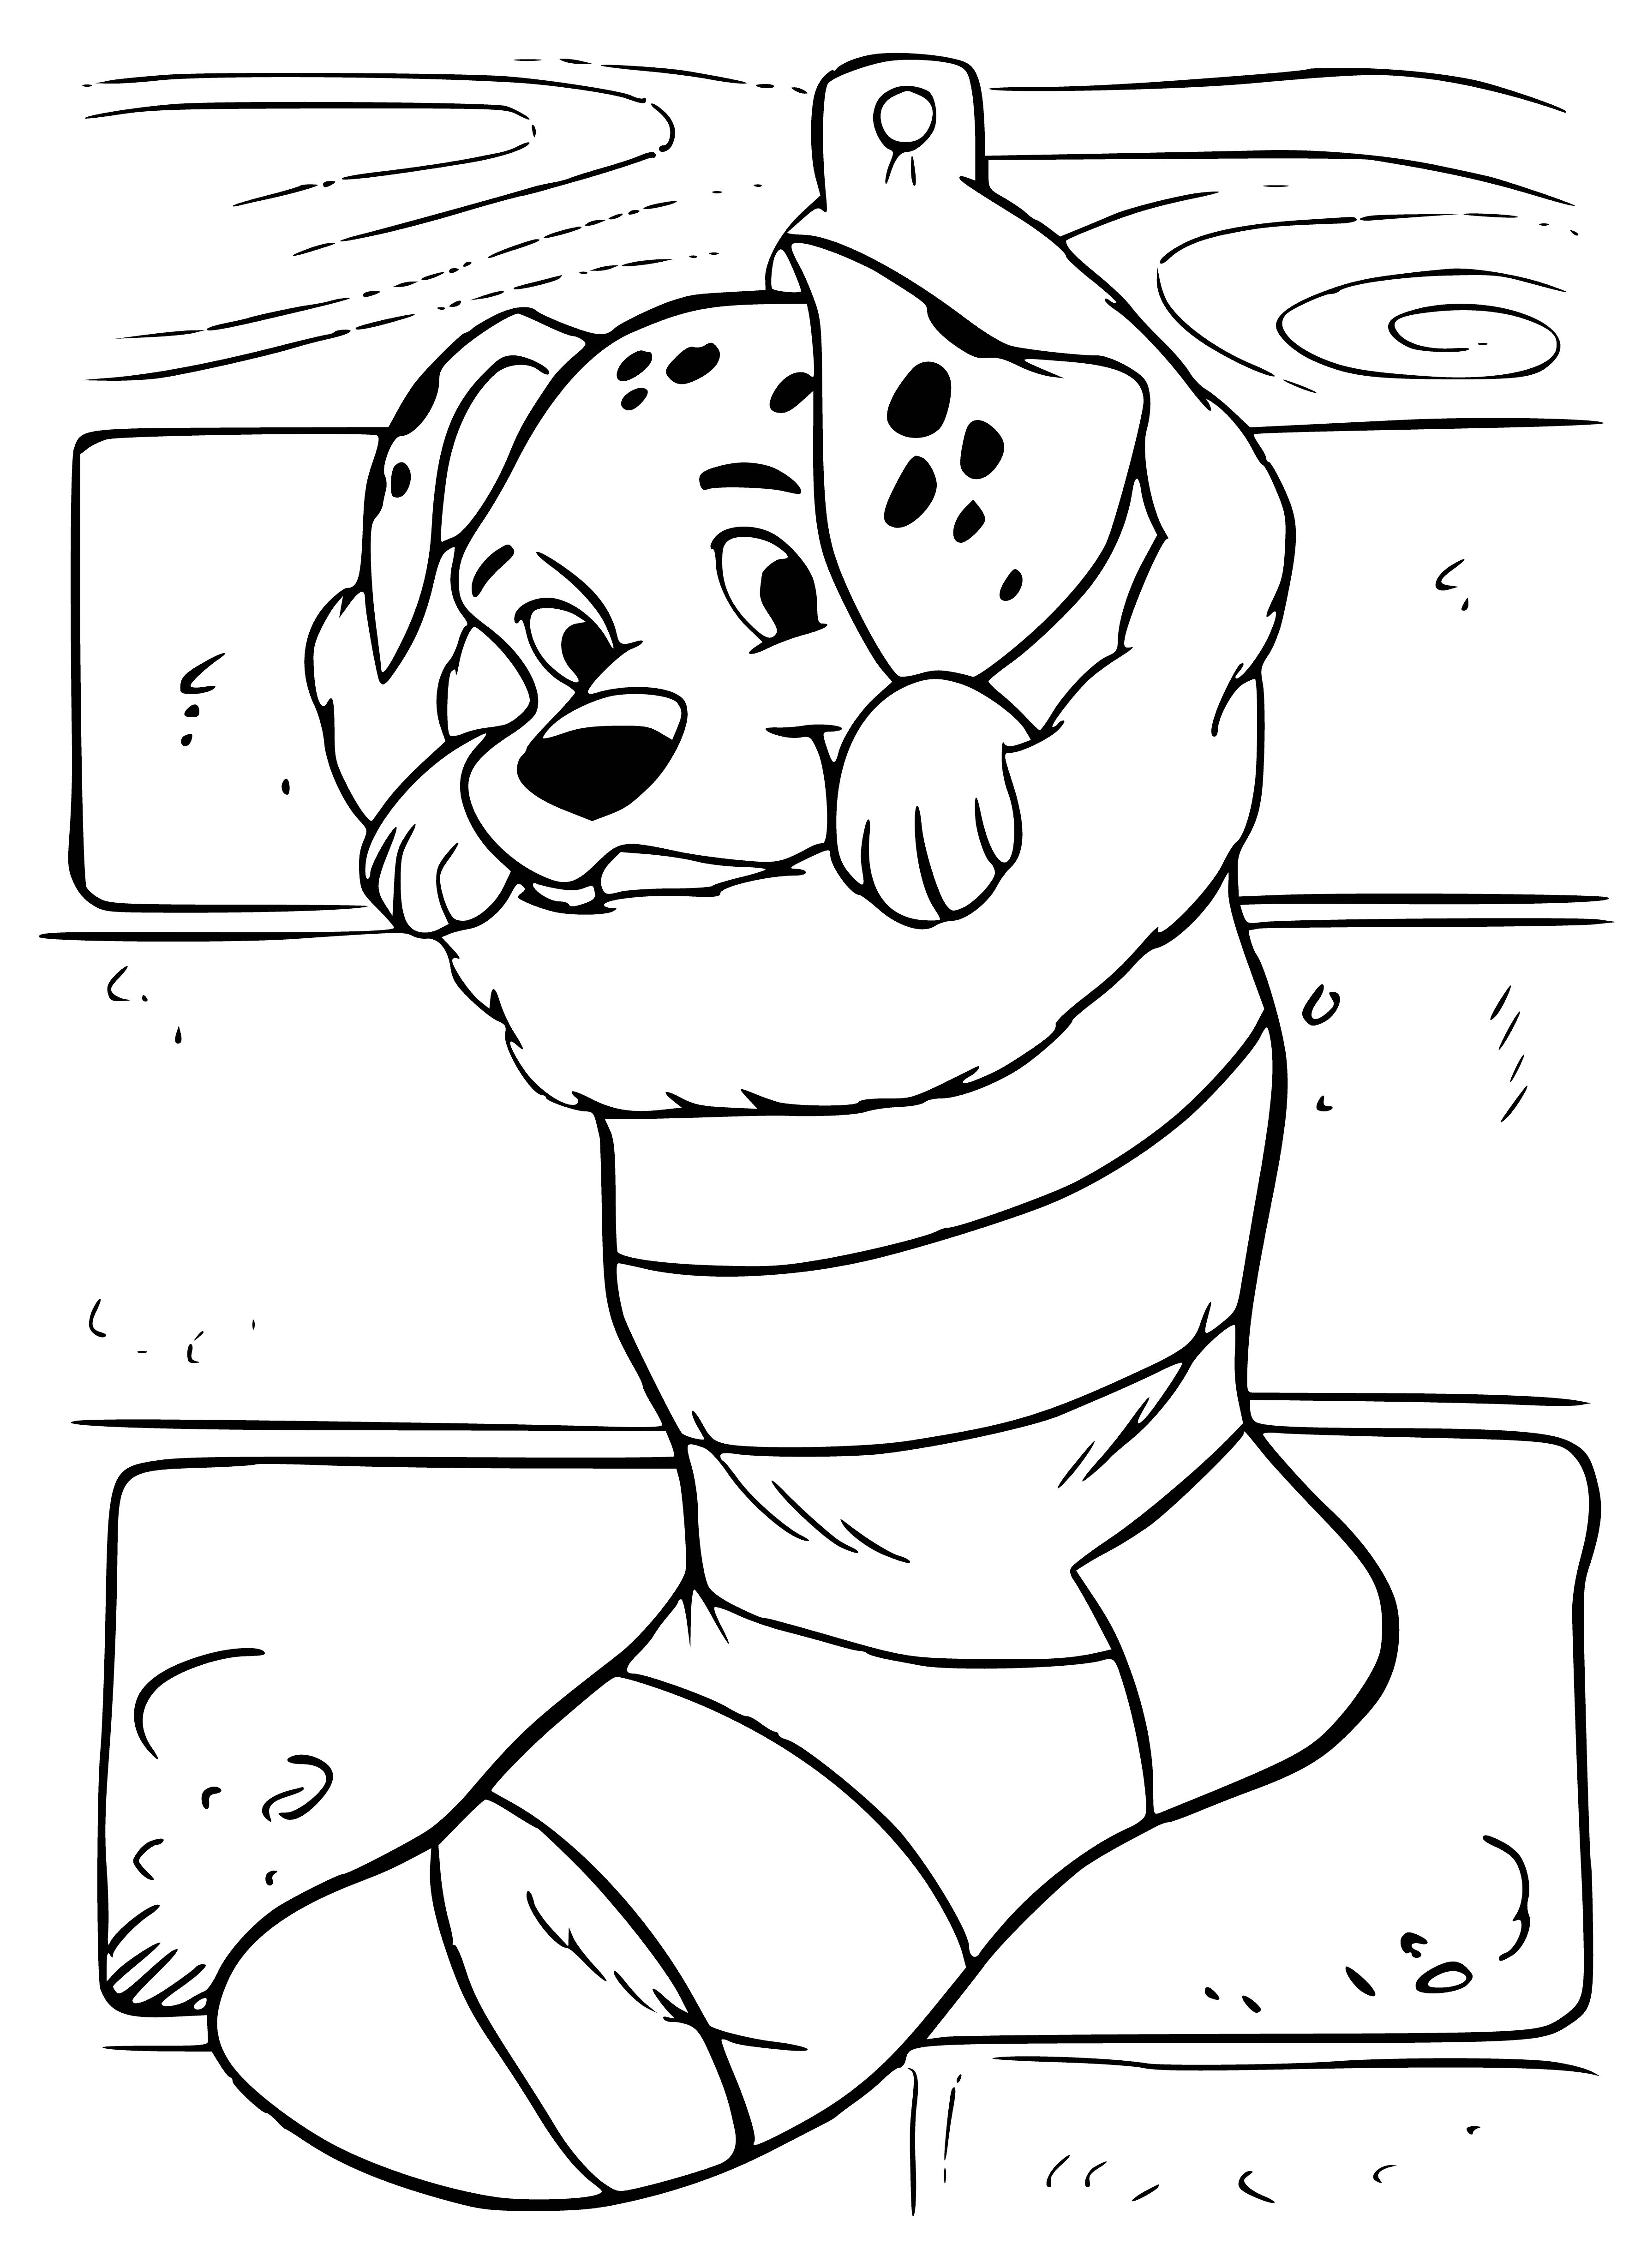 coloring page: Dalmatian running with party hat, horn, streamer in tail through confetti. #partypup